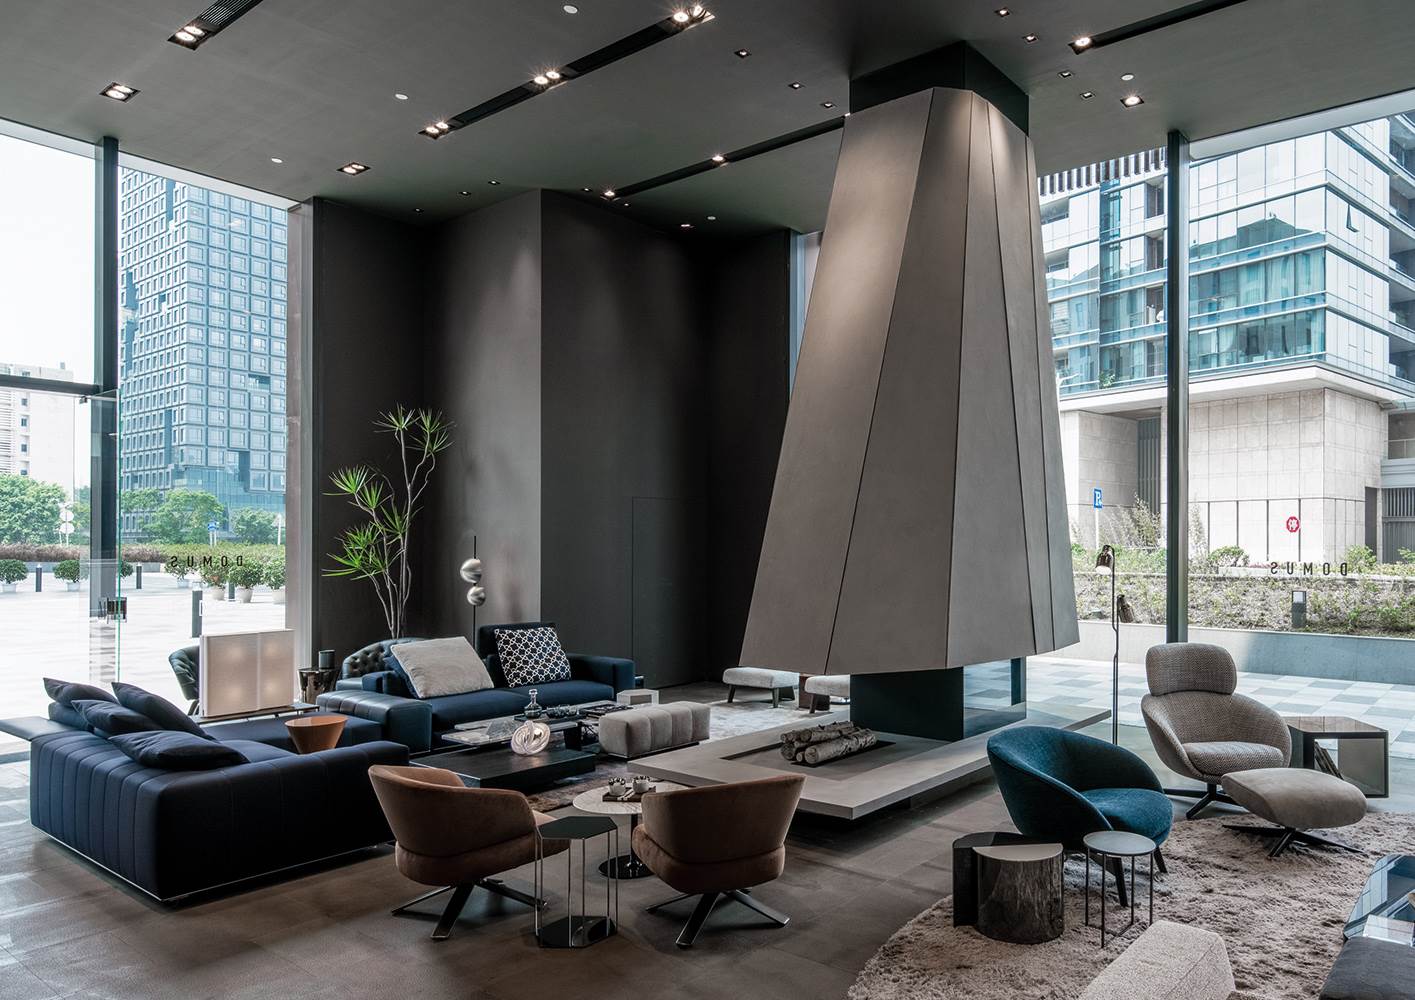 A new Minotti flagship store has opened in Shenzhen by Domus Tiandi